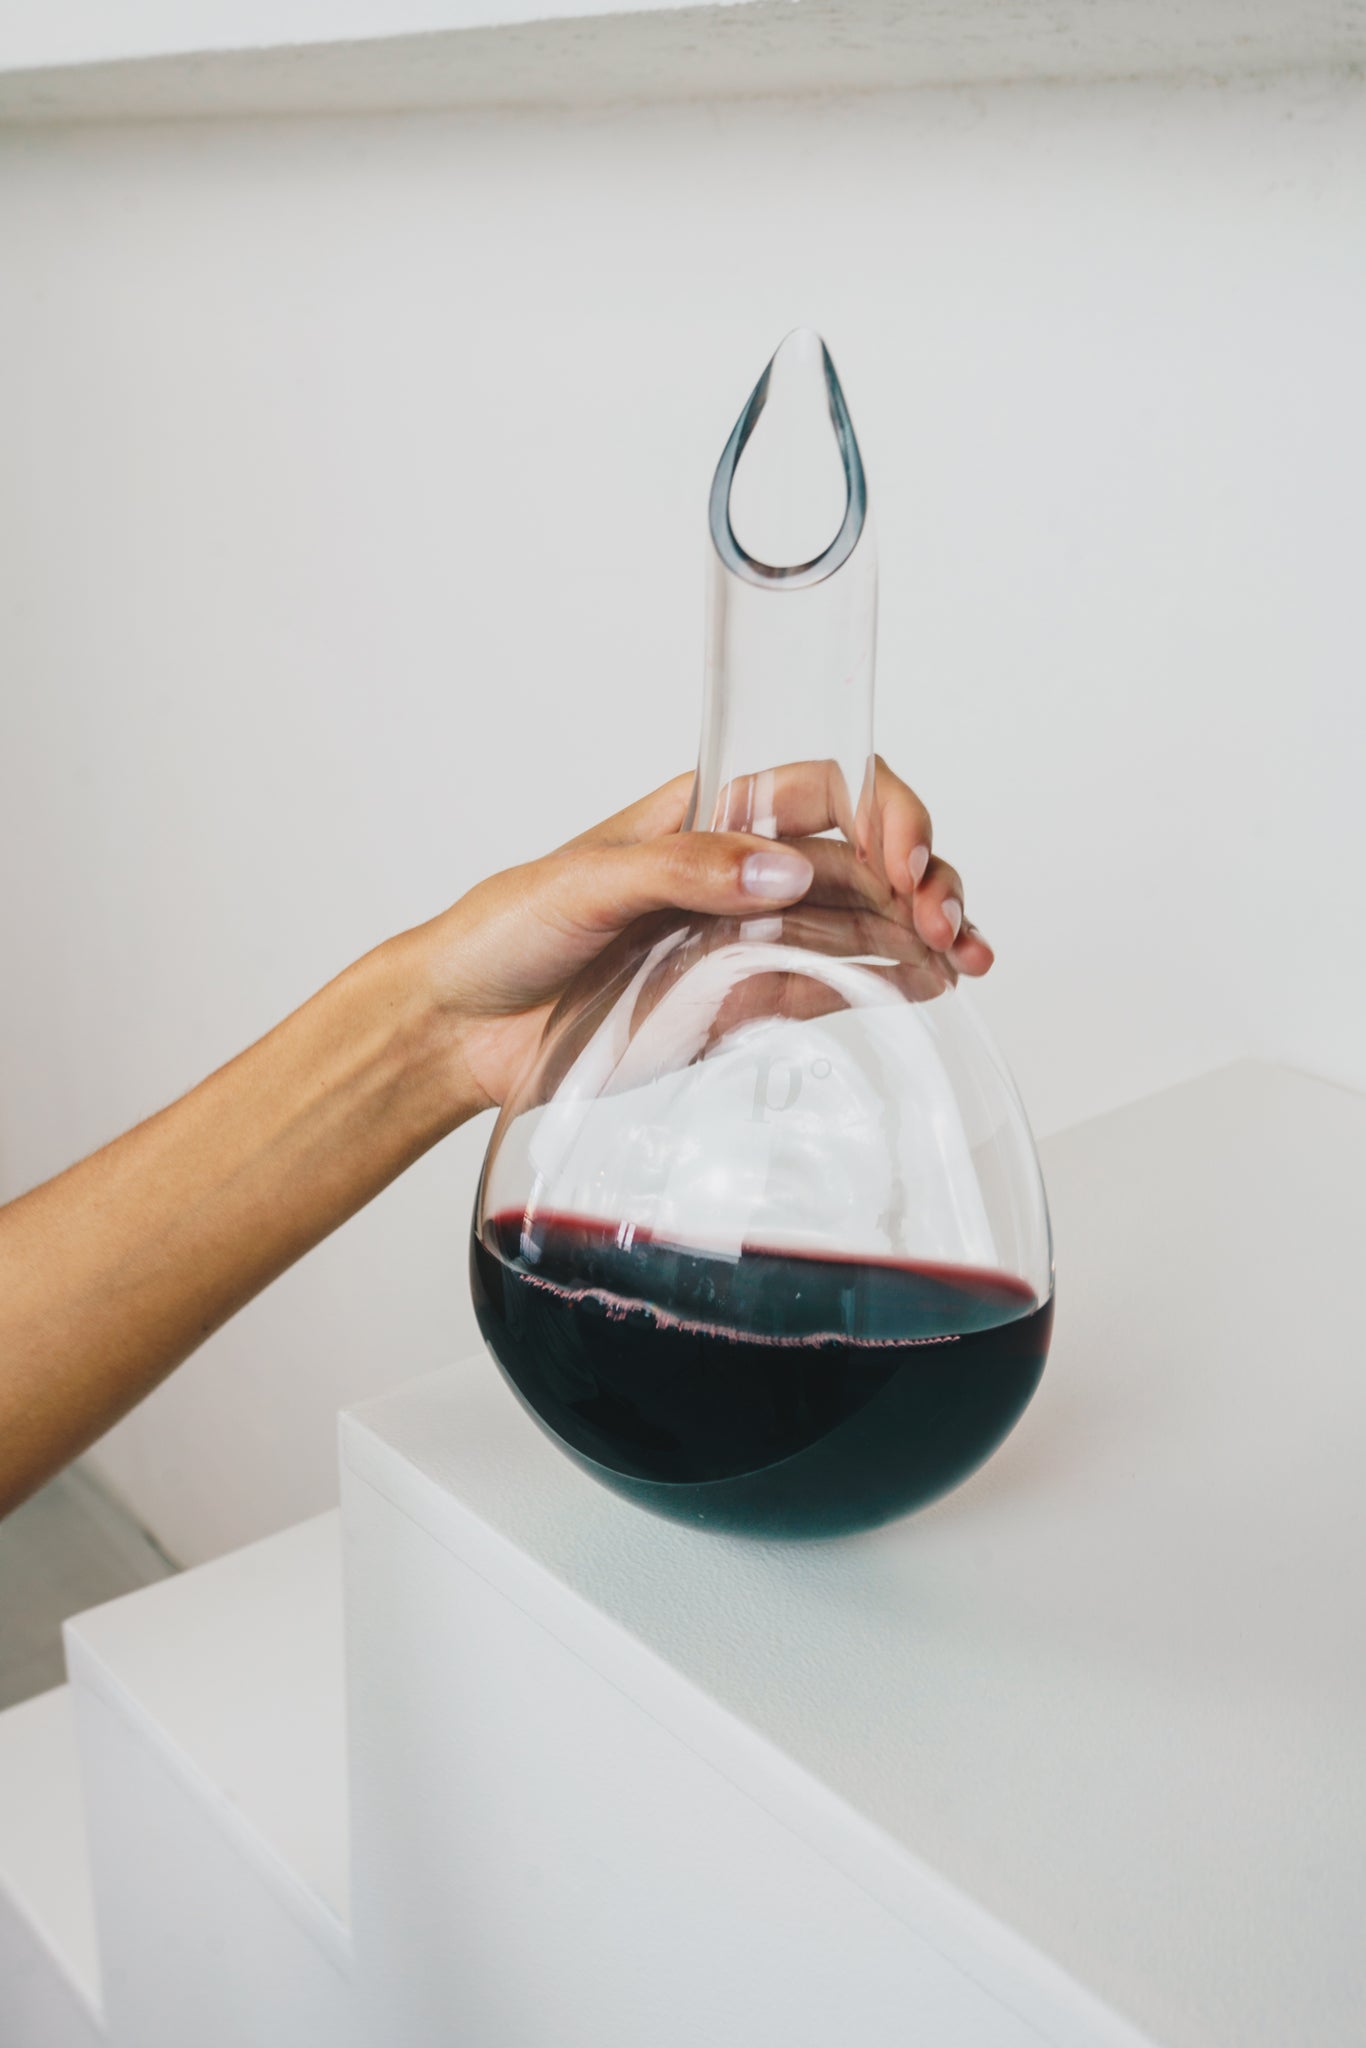 Glass Wine Carafes - SIZE OPTIONS